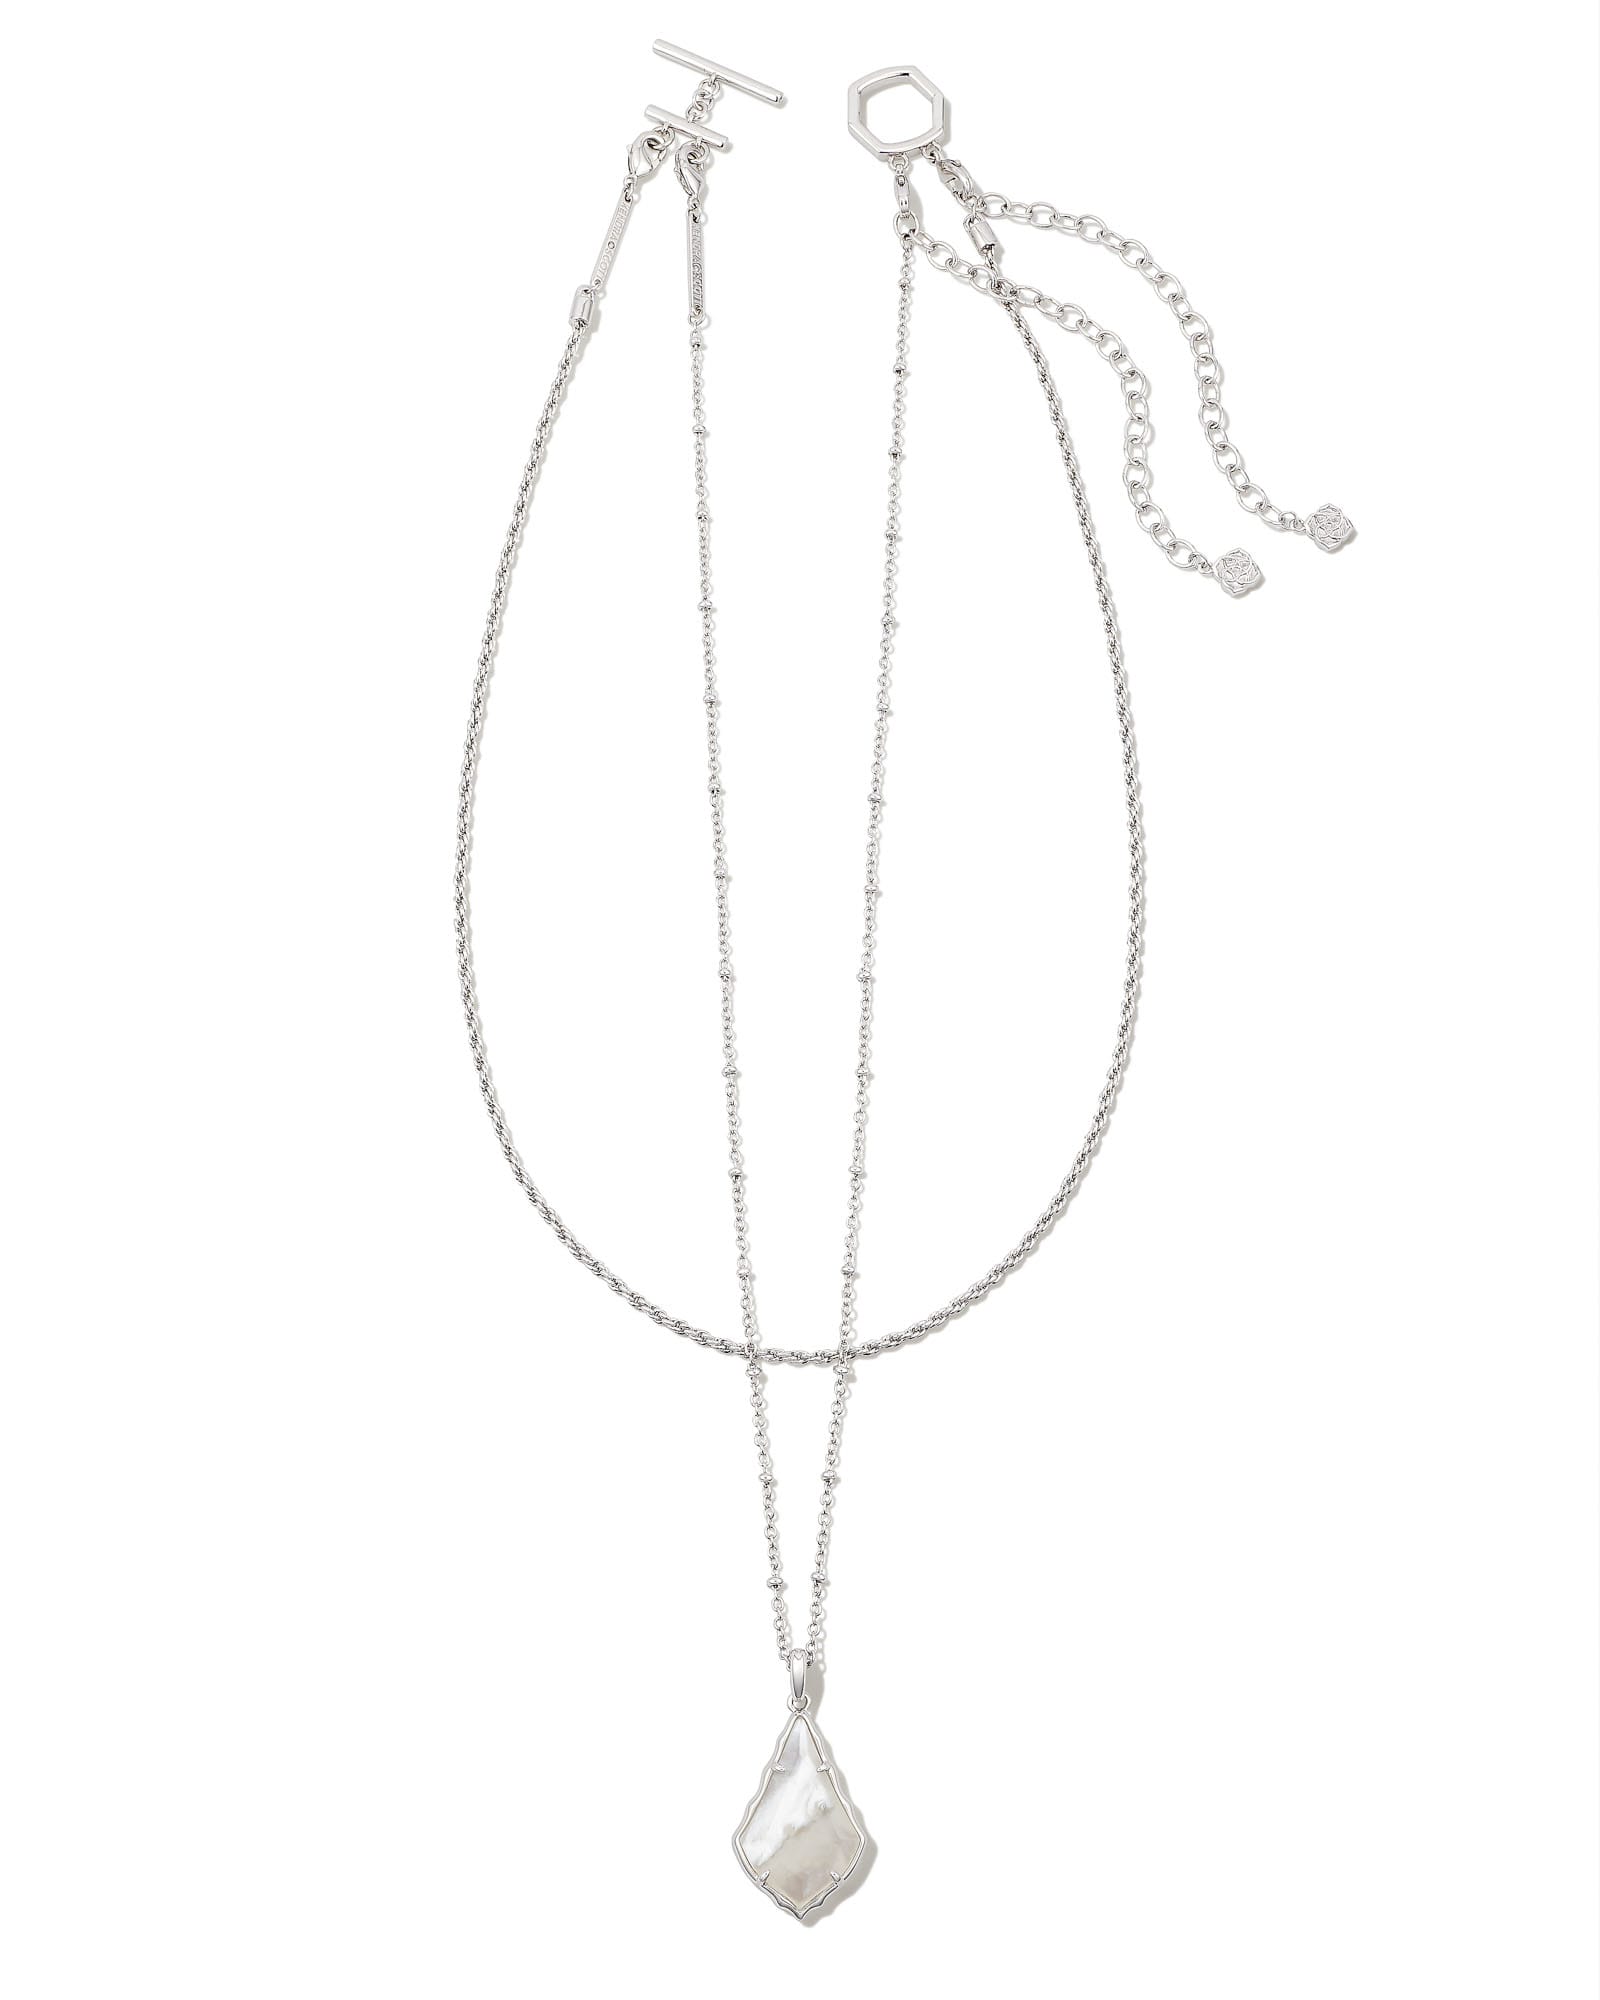 Faceted Alex Silver Convertible Necklace in Ivory Illusion